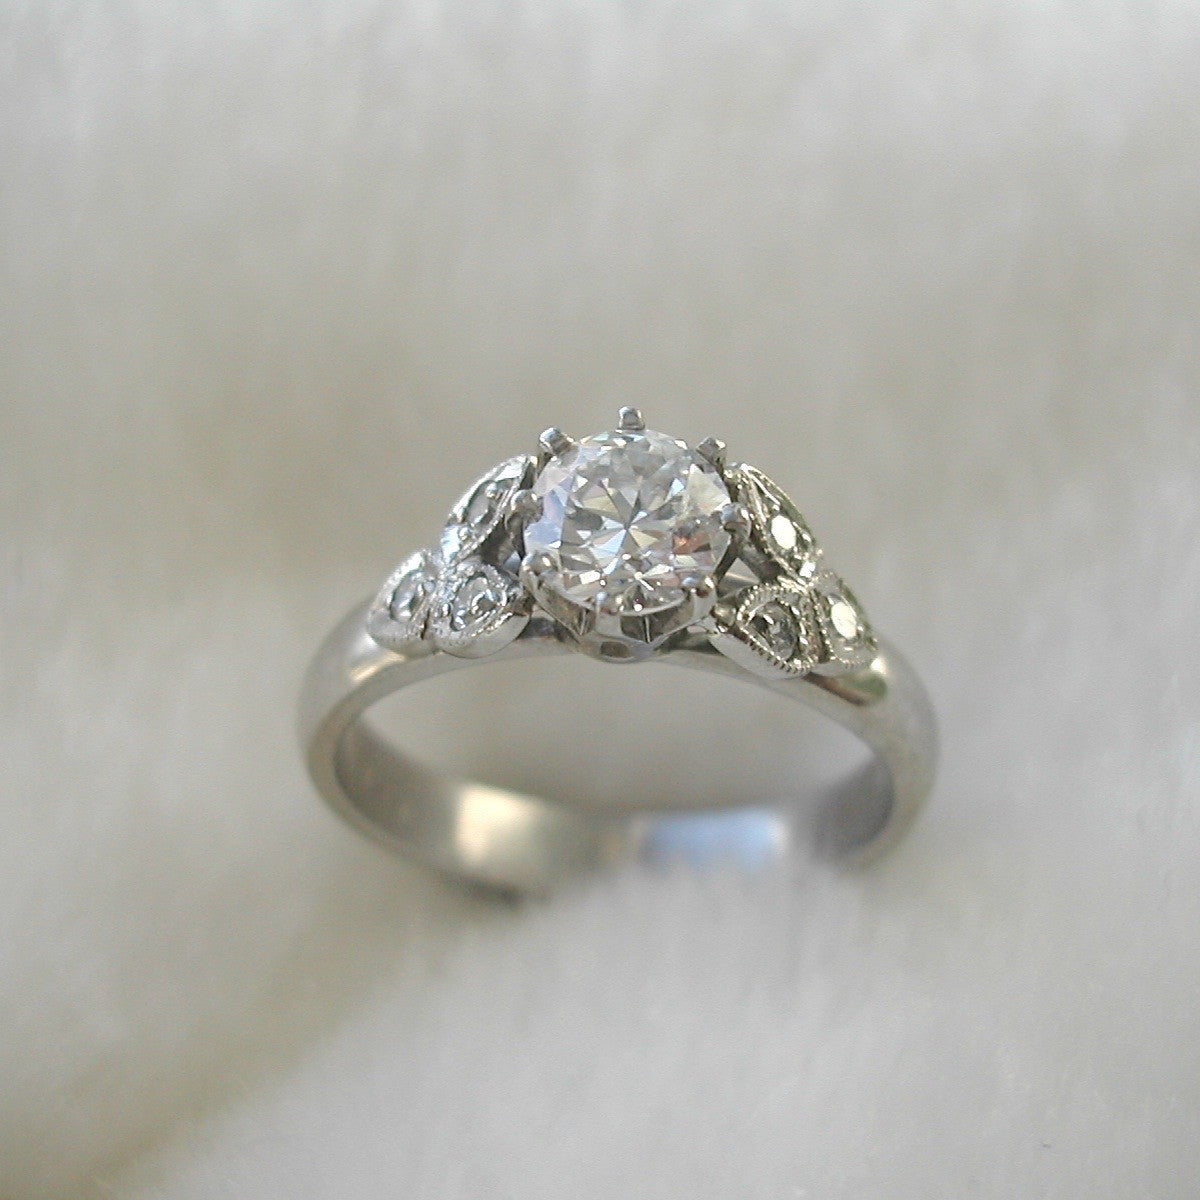 Victorian .25 Carat Old Mine Cut Diamond Solitaire Engagement Ring – Vintage  Diamond Ring